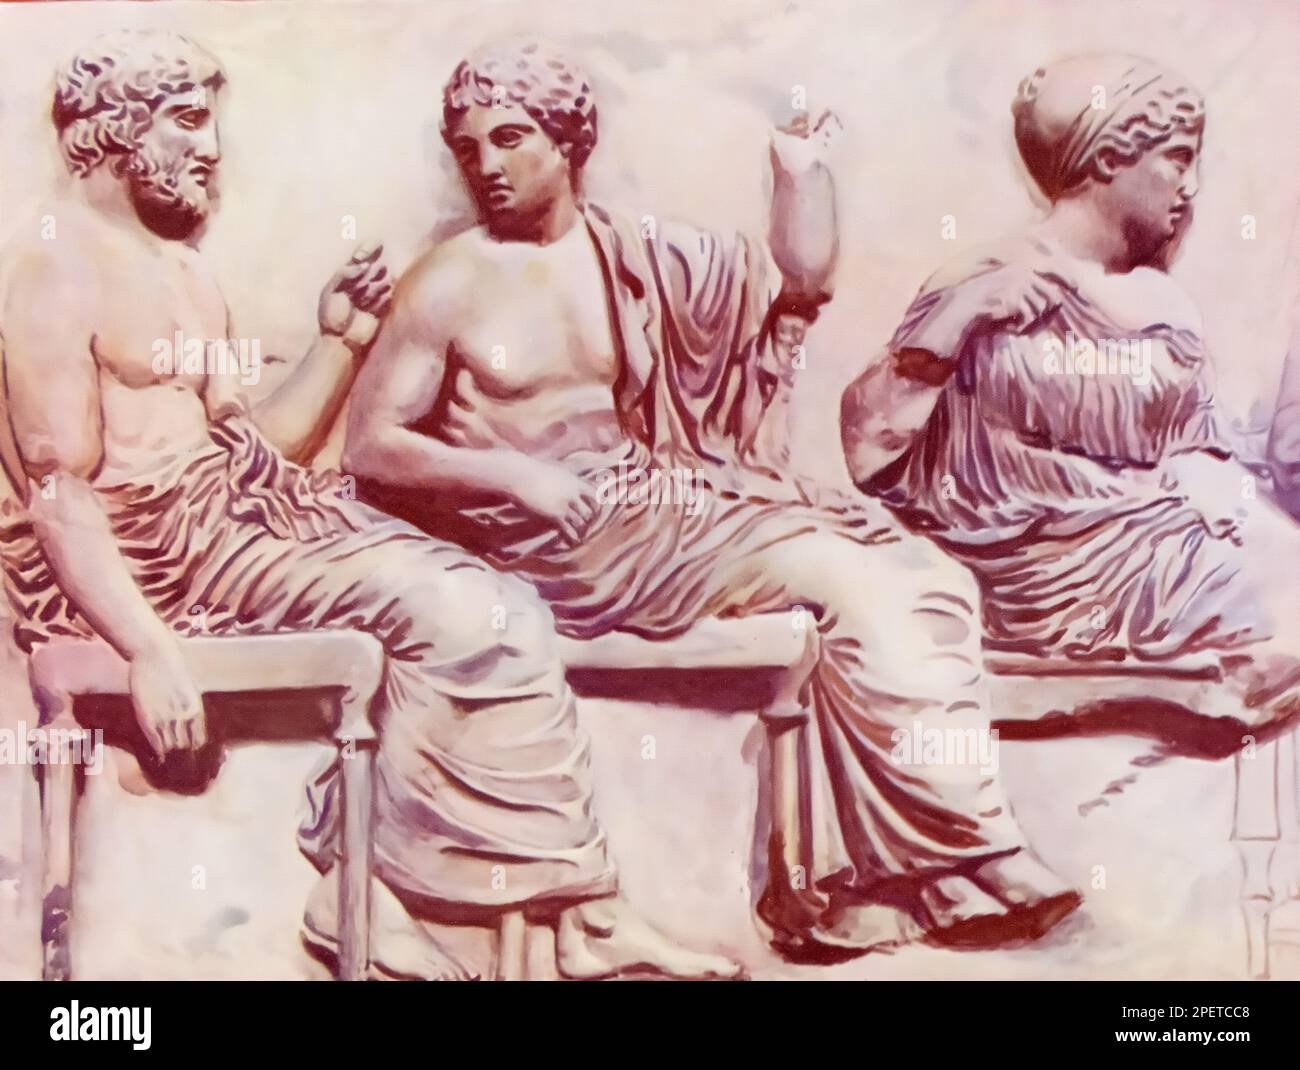 An illustration of a detail from the eastern frieze of the Parthenon, Greece. Showing from the left the gods Poseidon, Apollo or Dionysos and the goddess Peitho or Demeter. Stock Photo